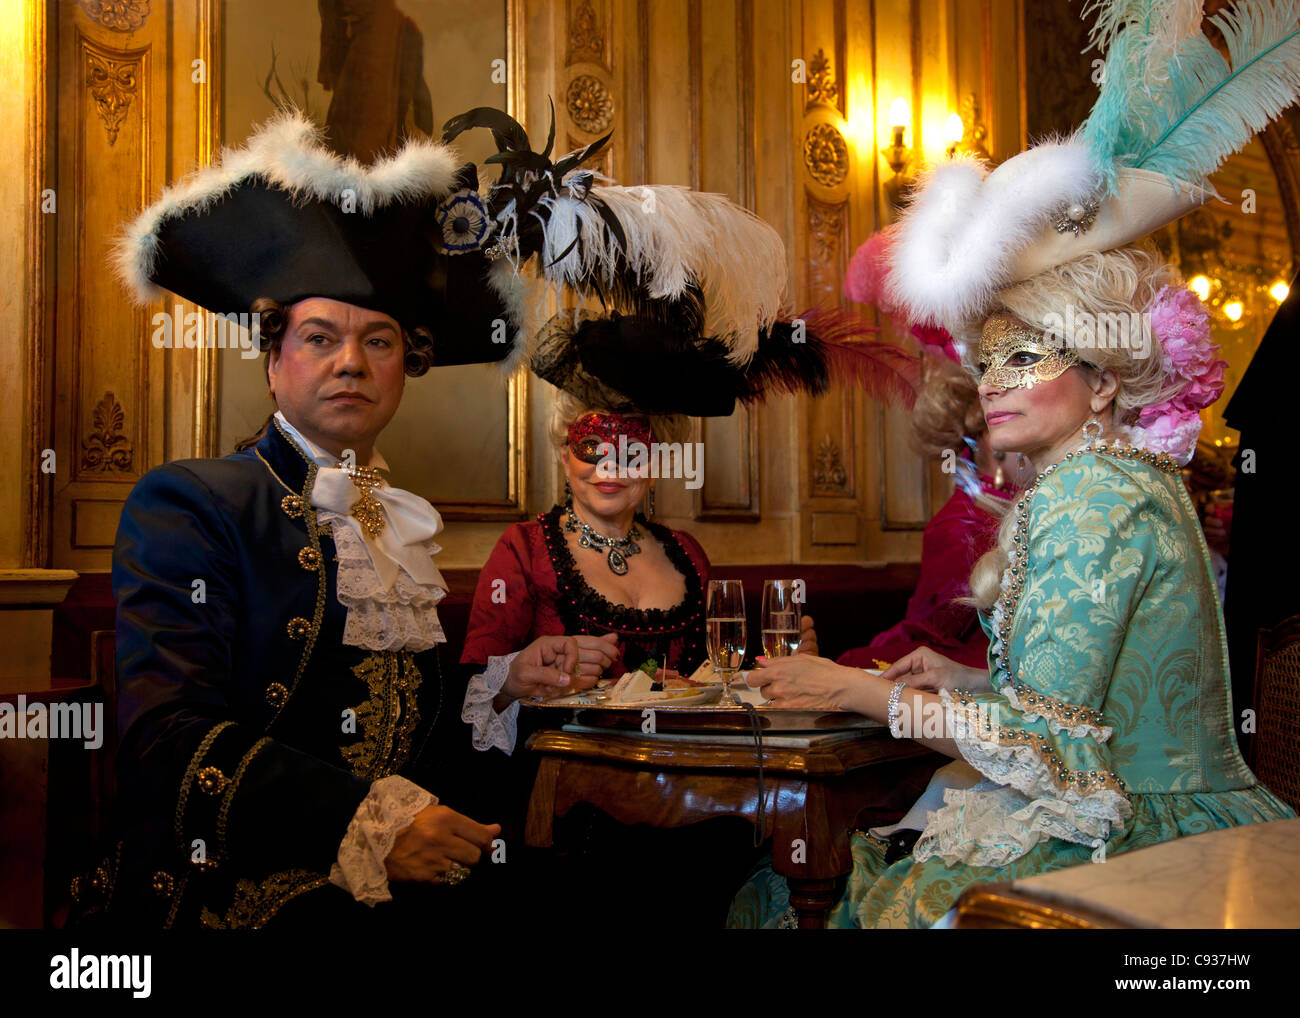 Venice, Veneto, Italy; Nostalgic reminiscence of the luxurious past with masked guests dressed for carnival. Stock Photo